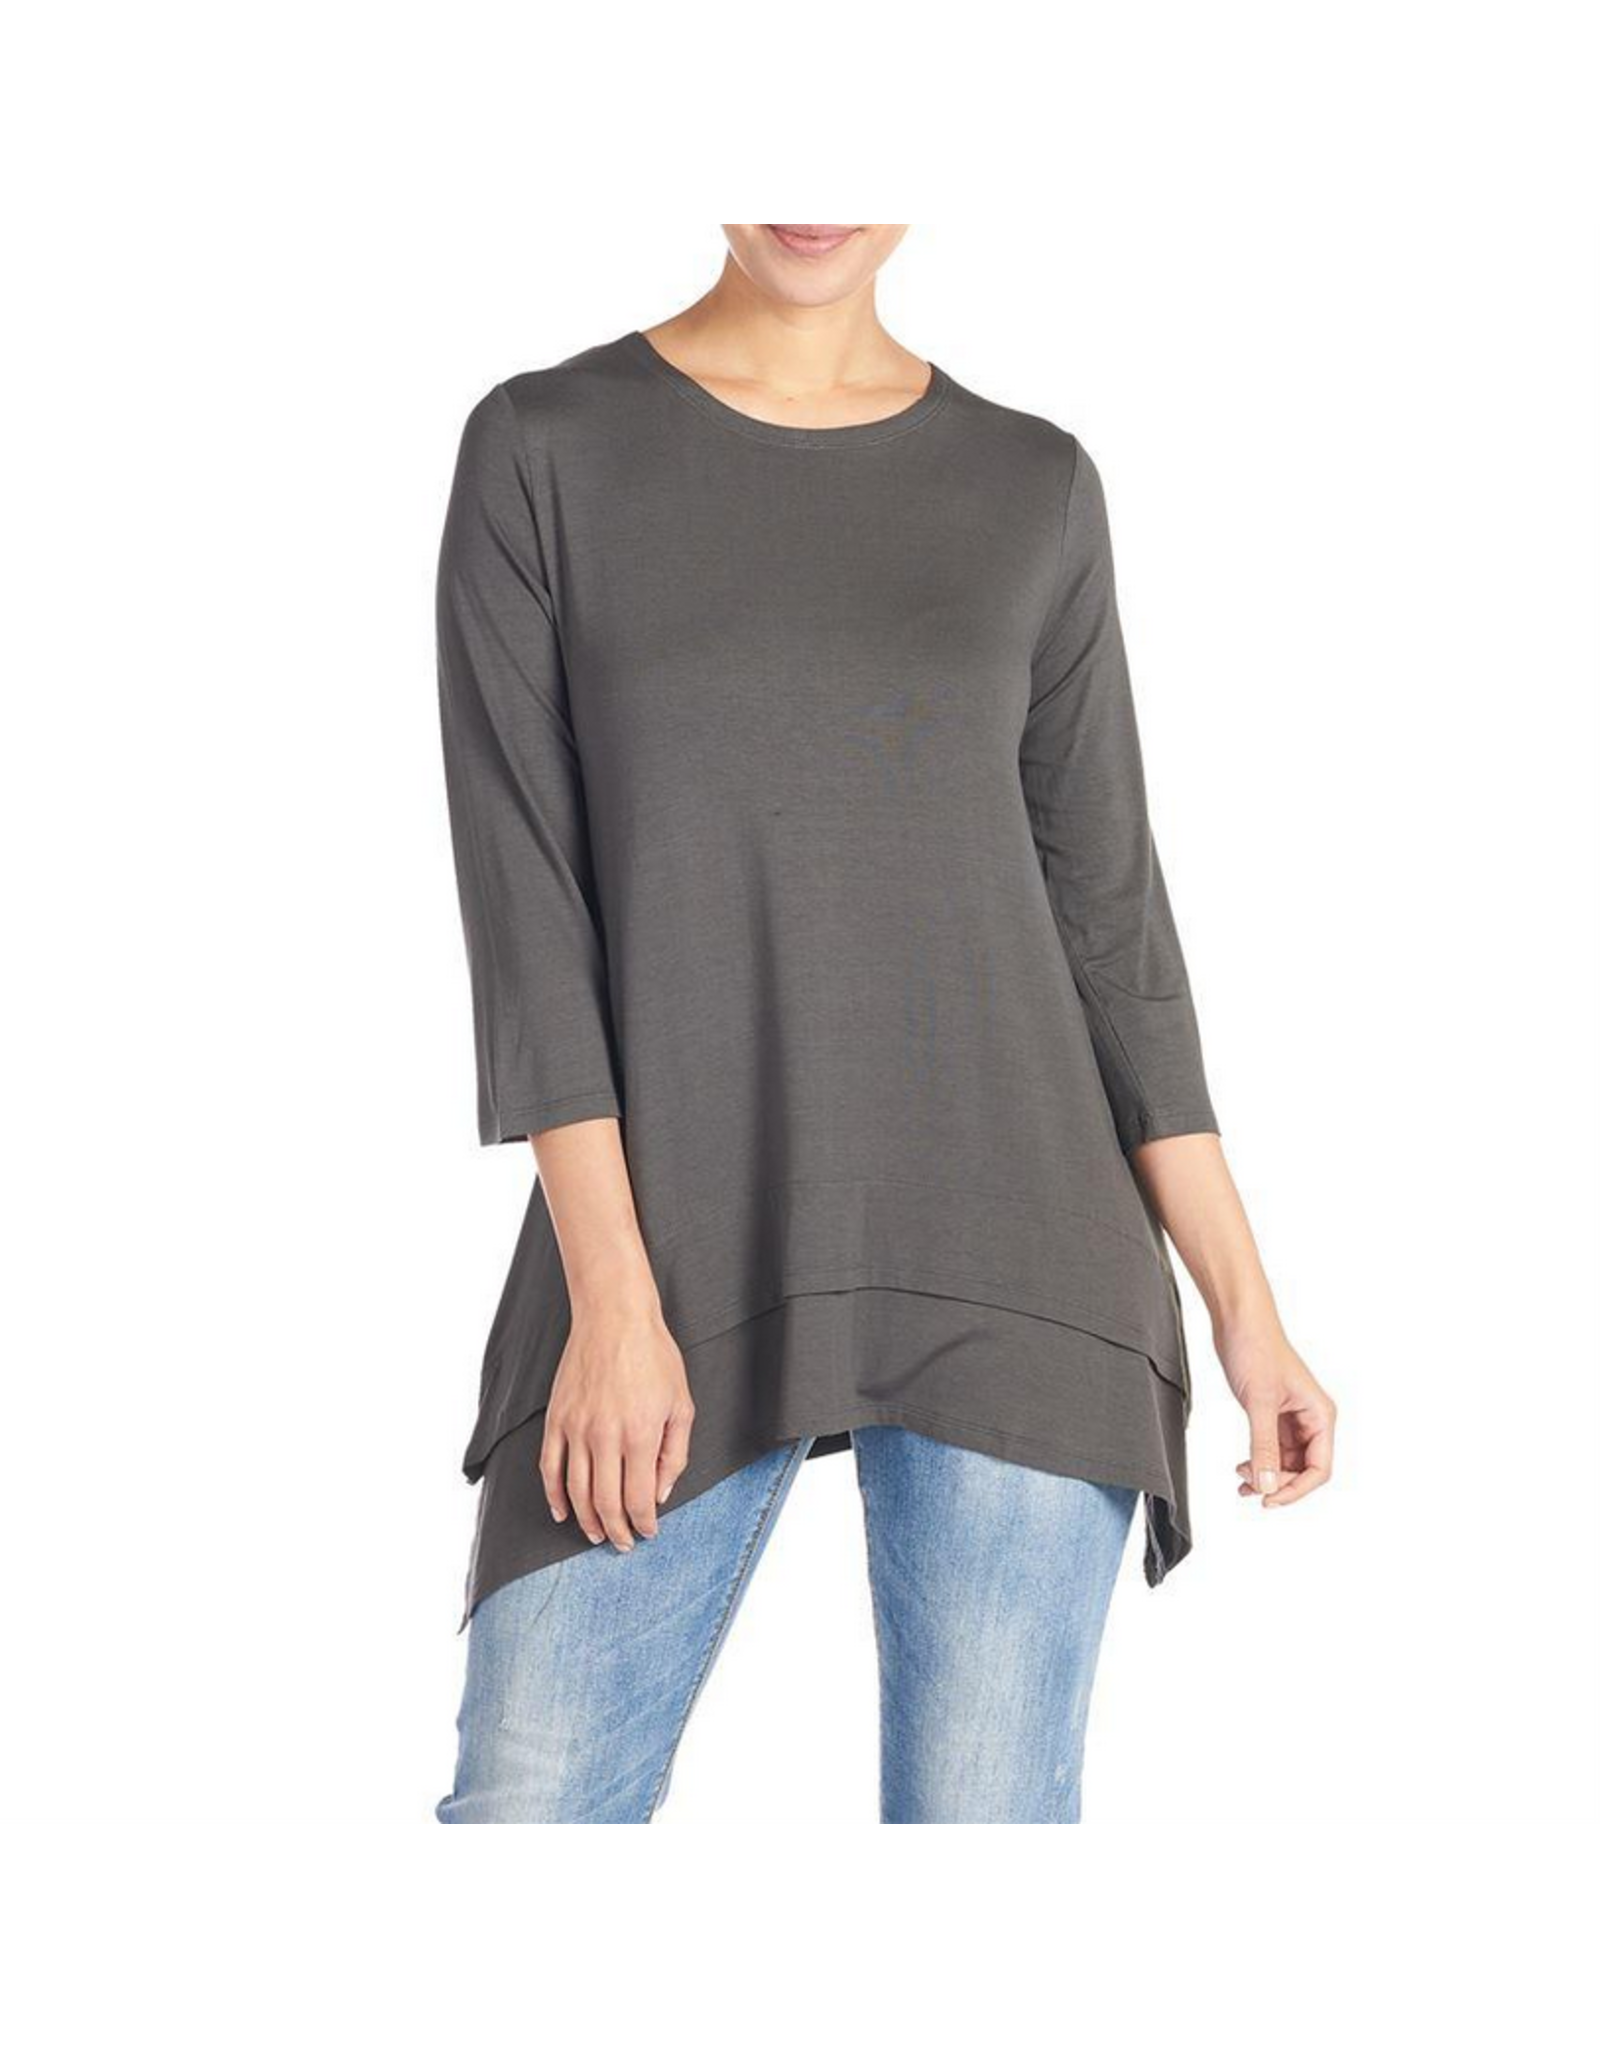 coco+carmen Double Layer Tunic-Pewter